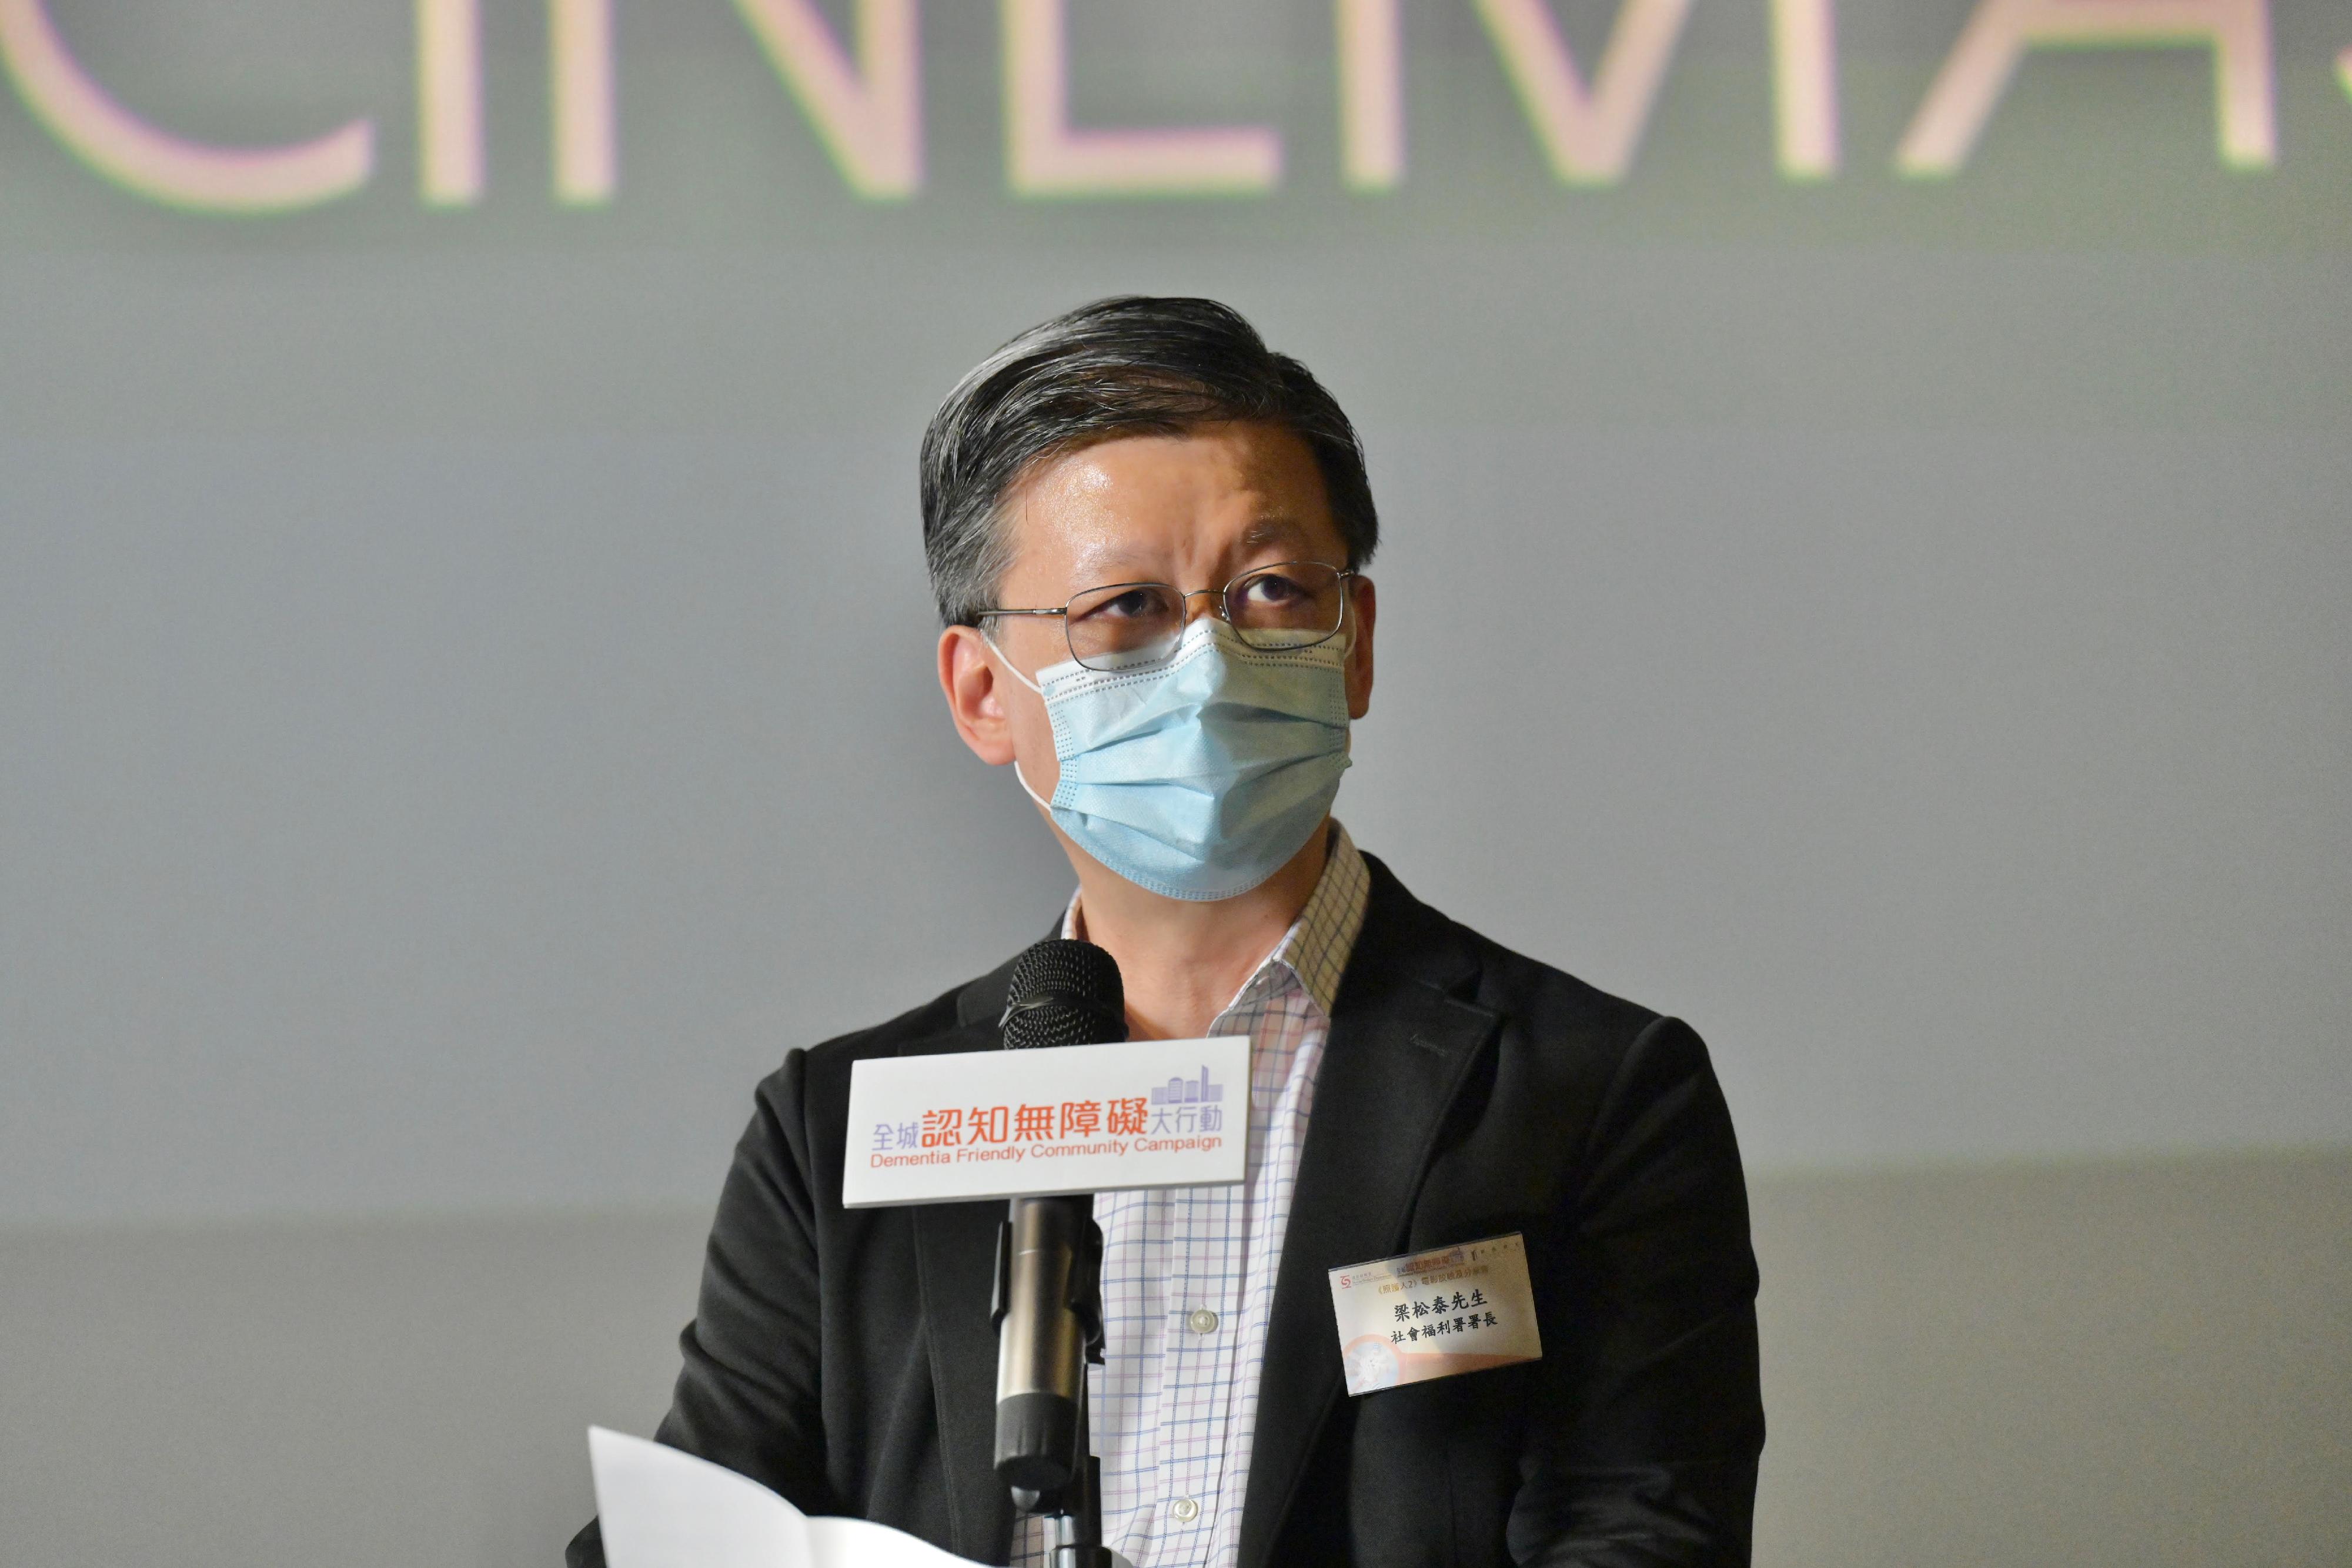 The Director of Social Welfare, Mr Gordon Leung, speaks at the "CareNin2" movie screening and sharing session of the Dementia Friendly Community Campaign today (December 12).